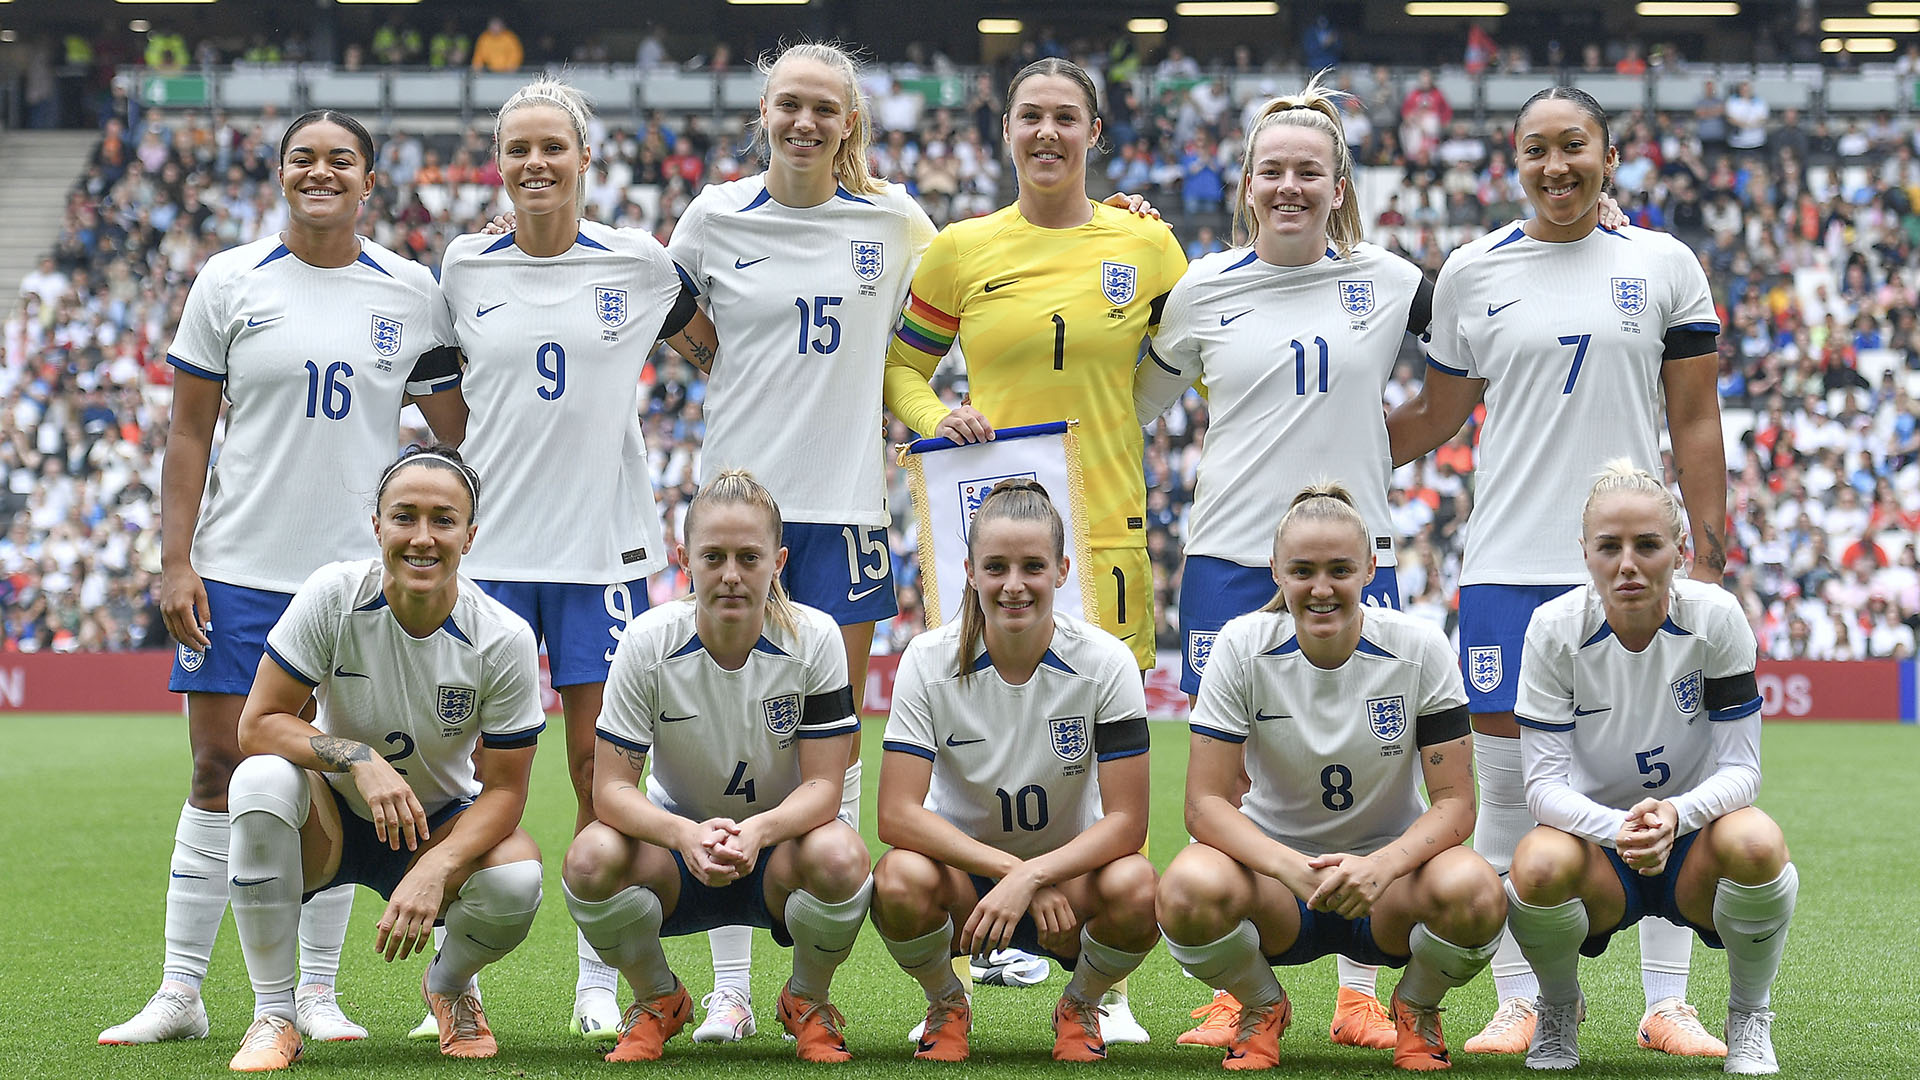 The England team ahead of the FIFA Women's World Cup, 2023